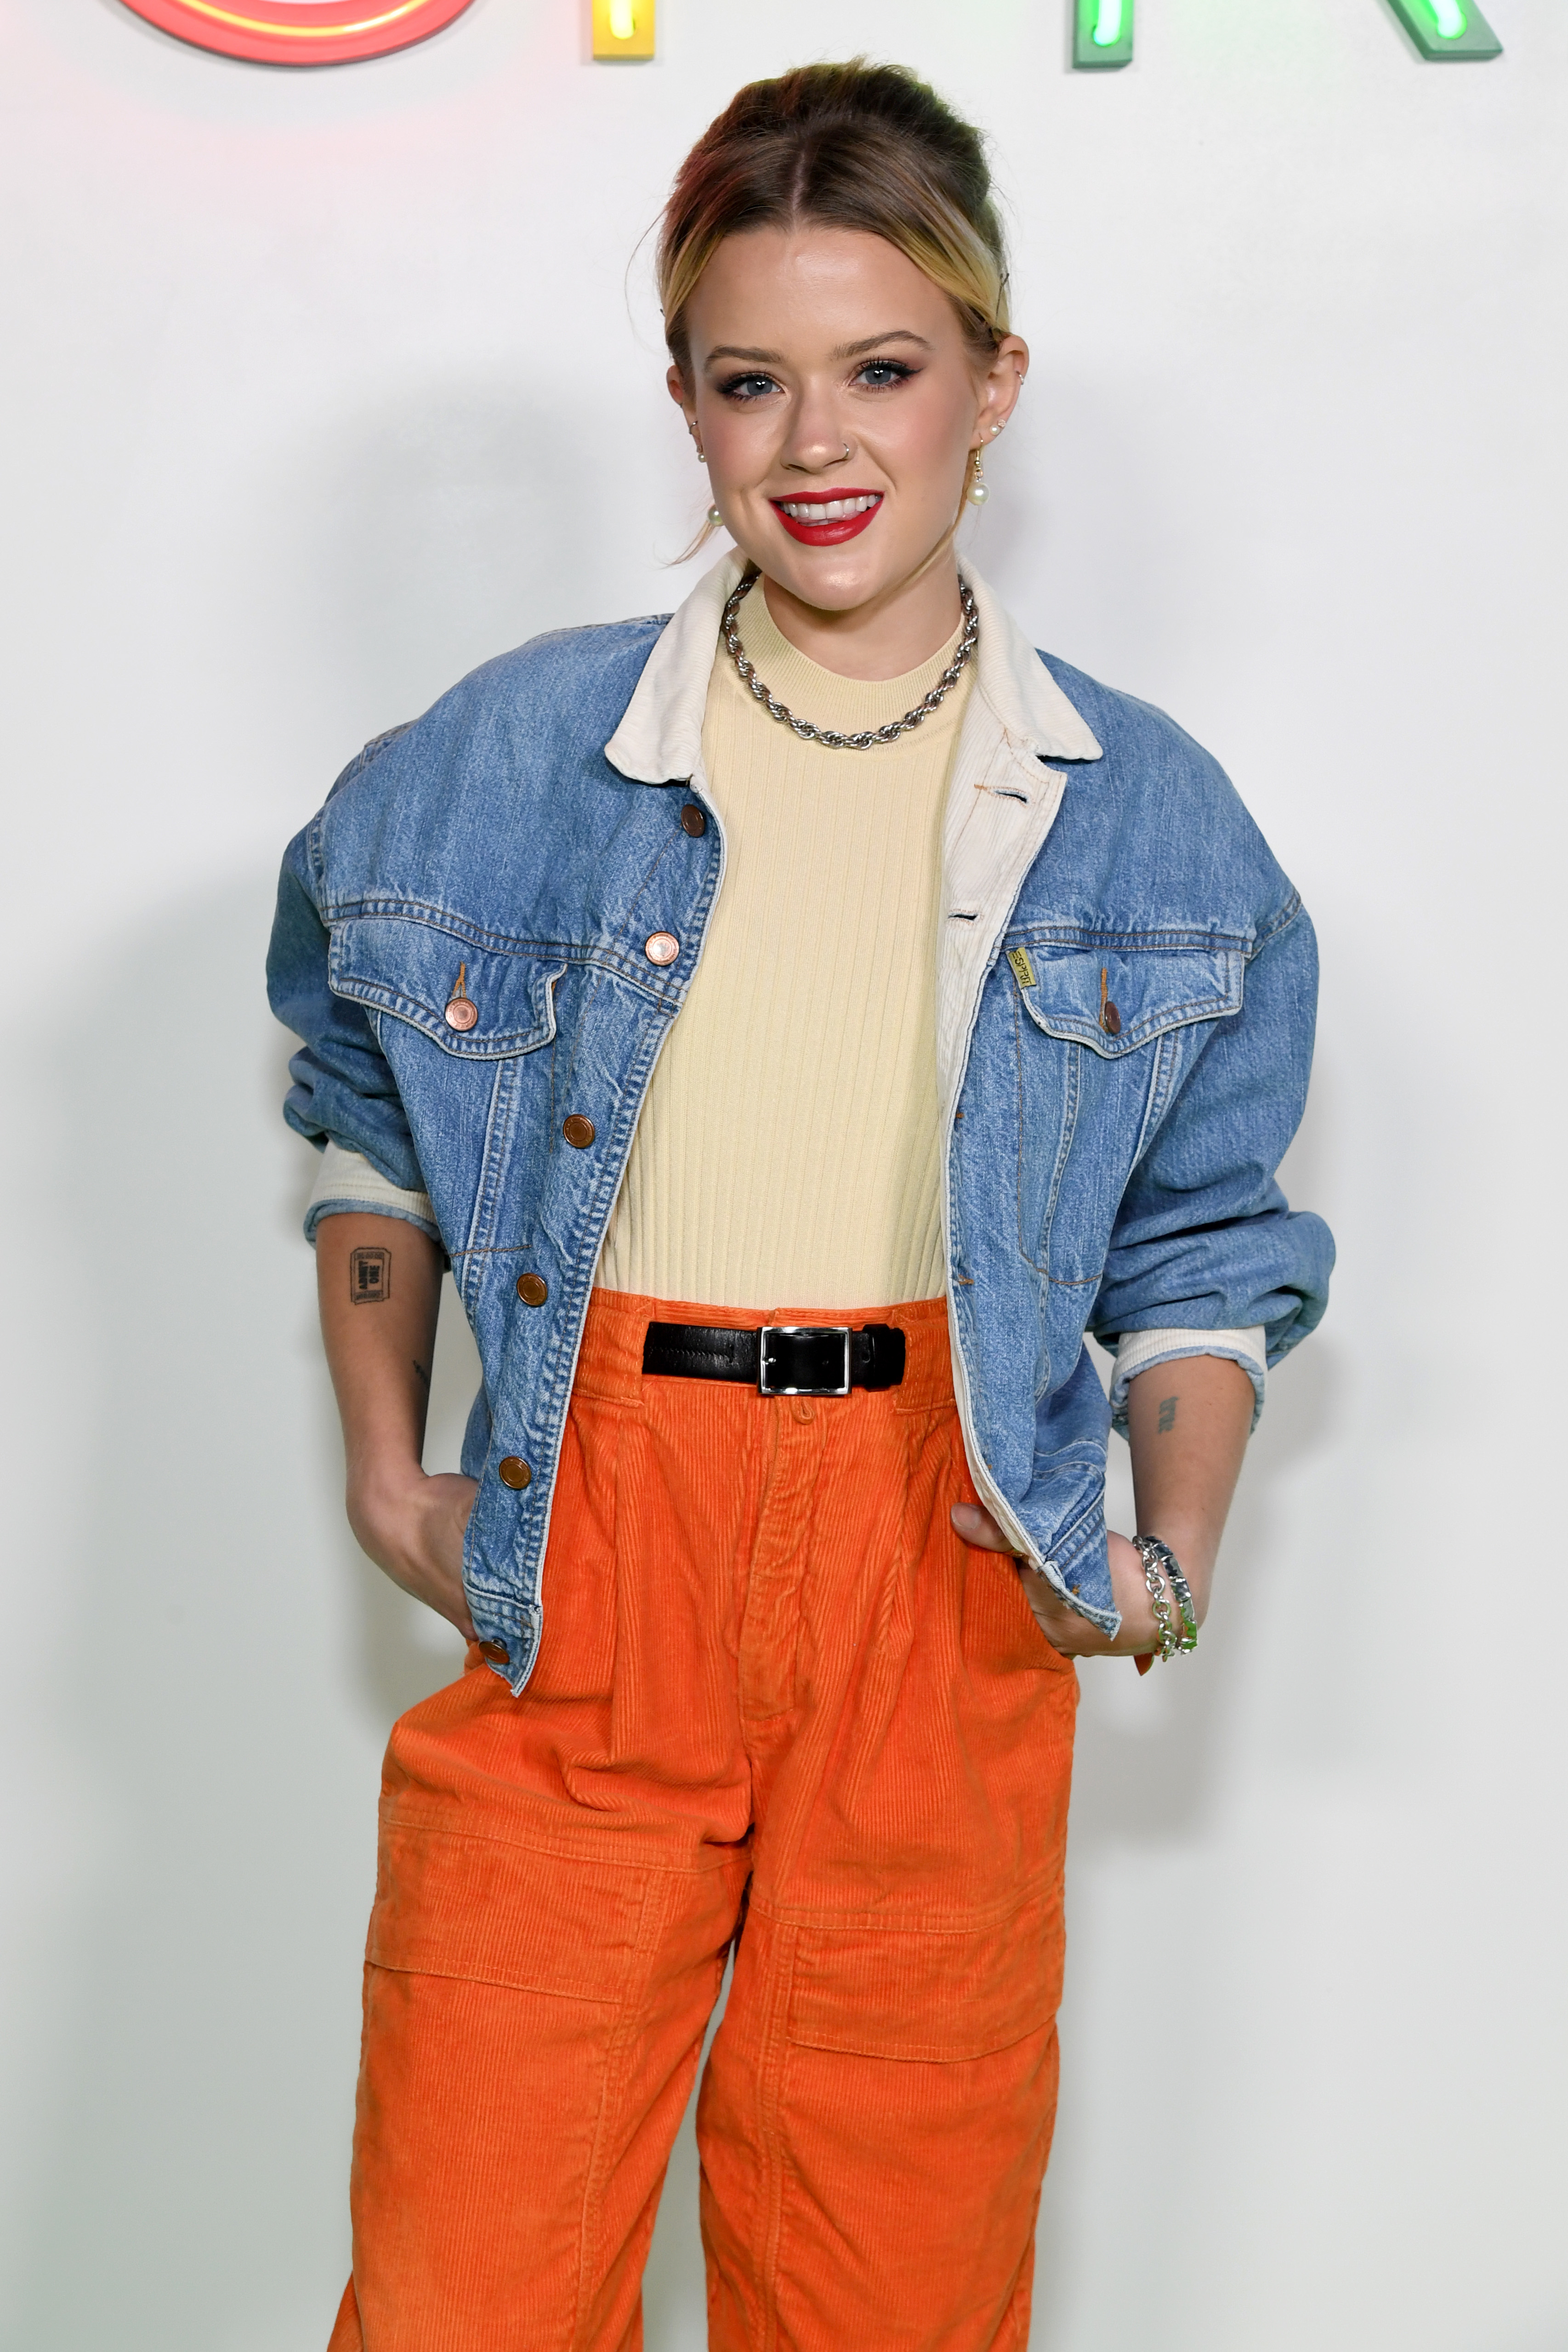 Ava Phillippe in denim jacket over a light top, orange pants, and chunky necklace, smiling